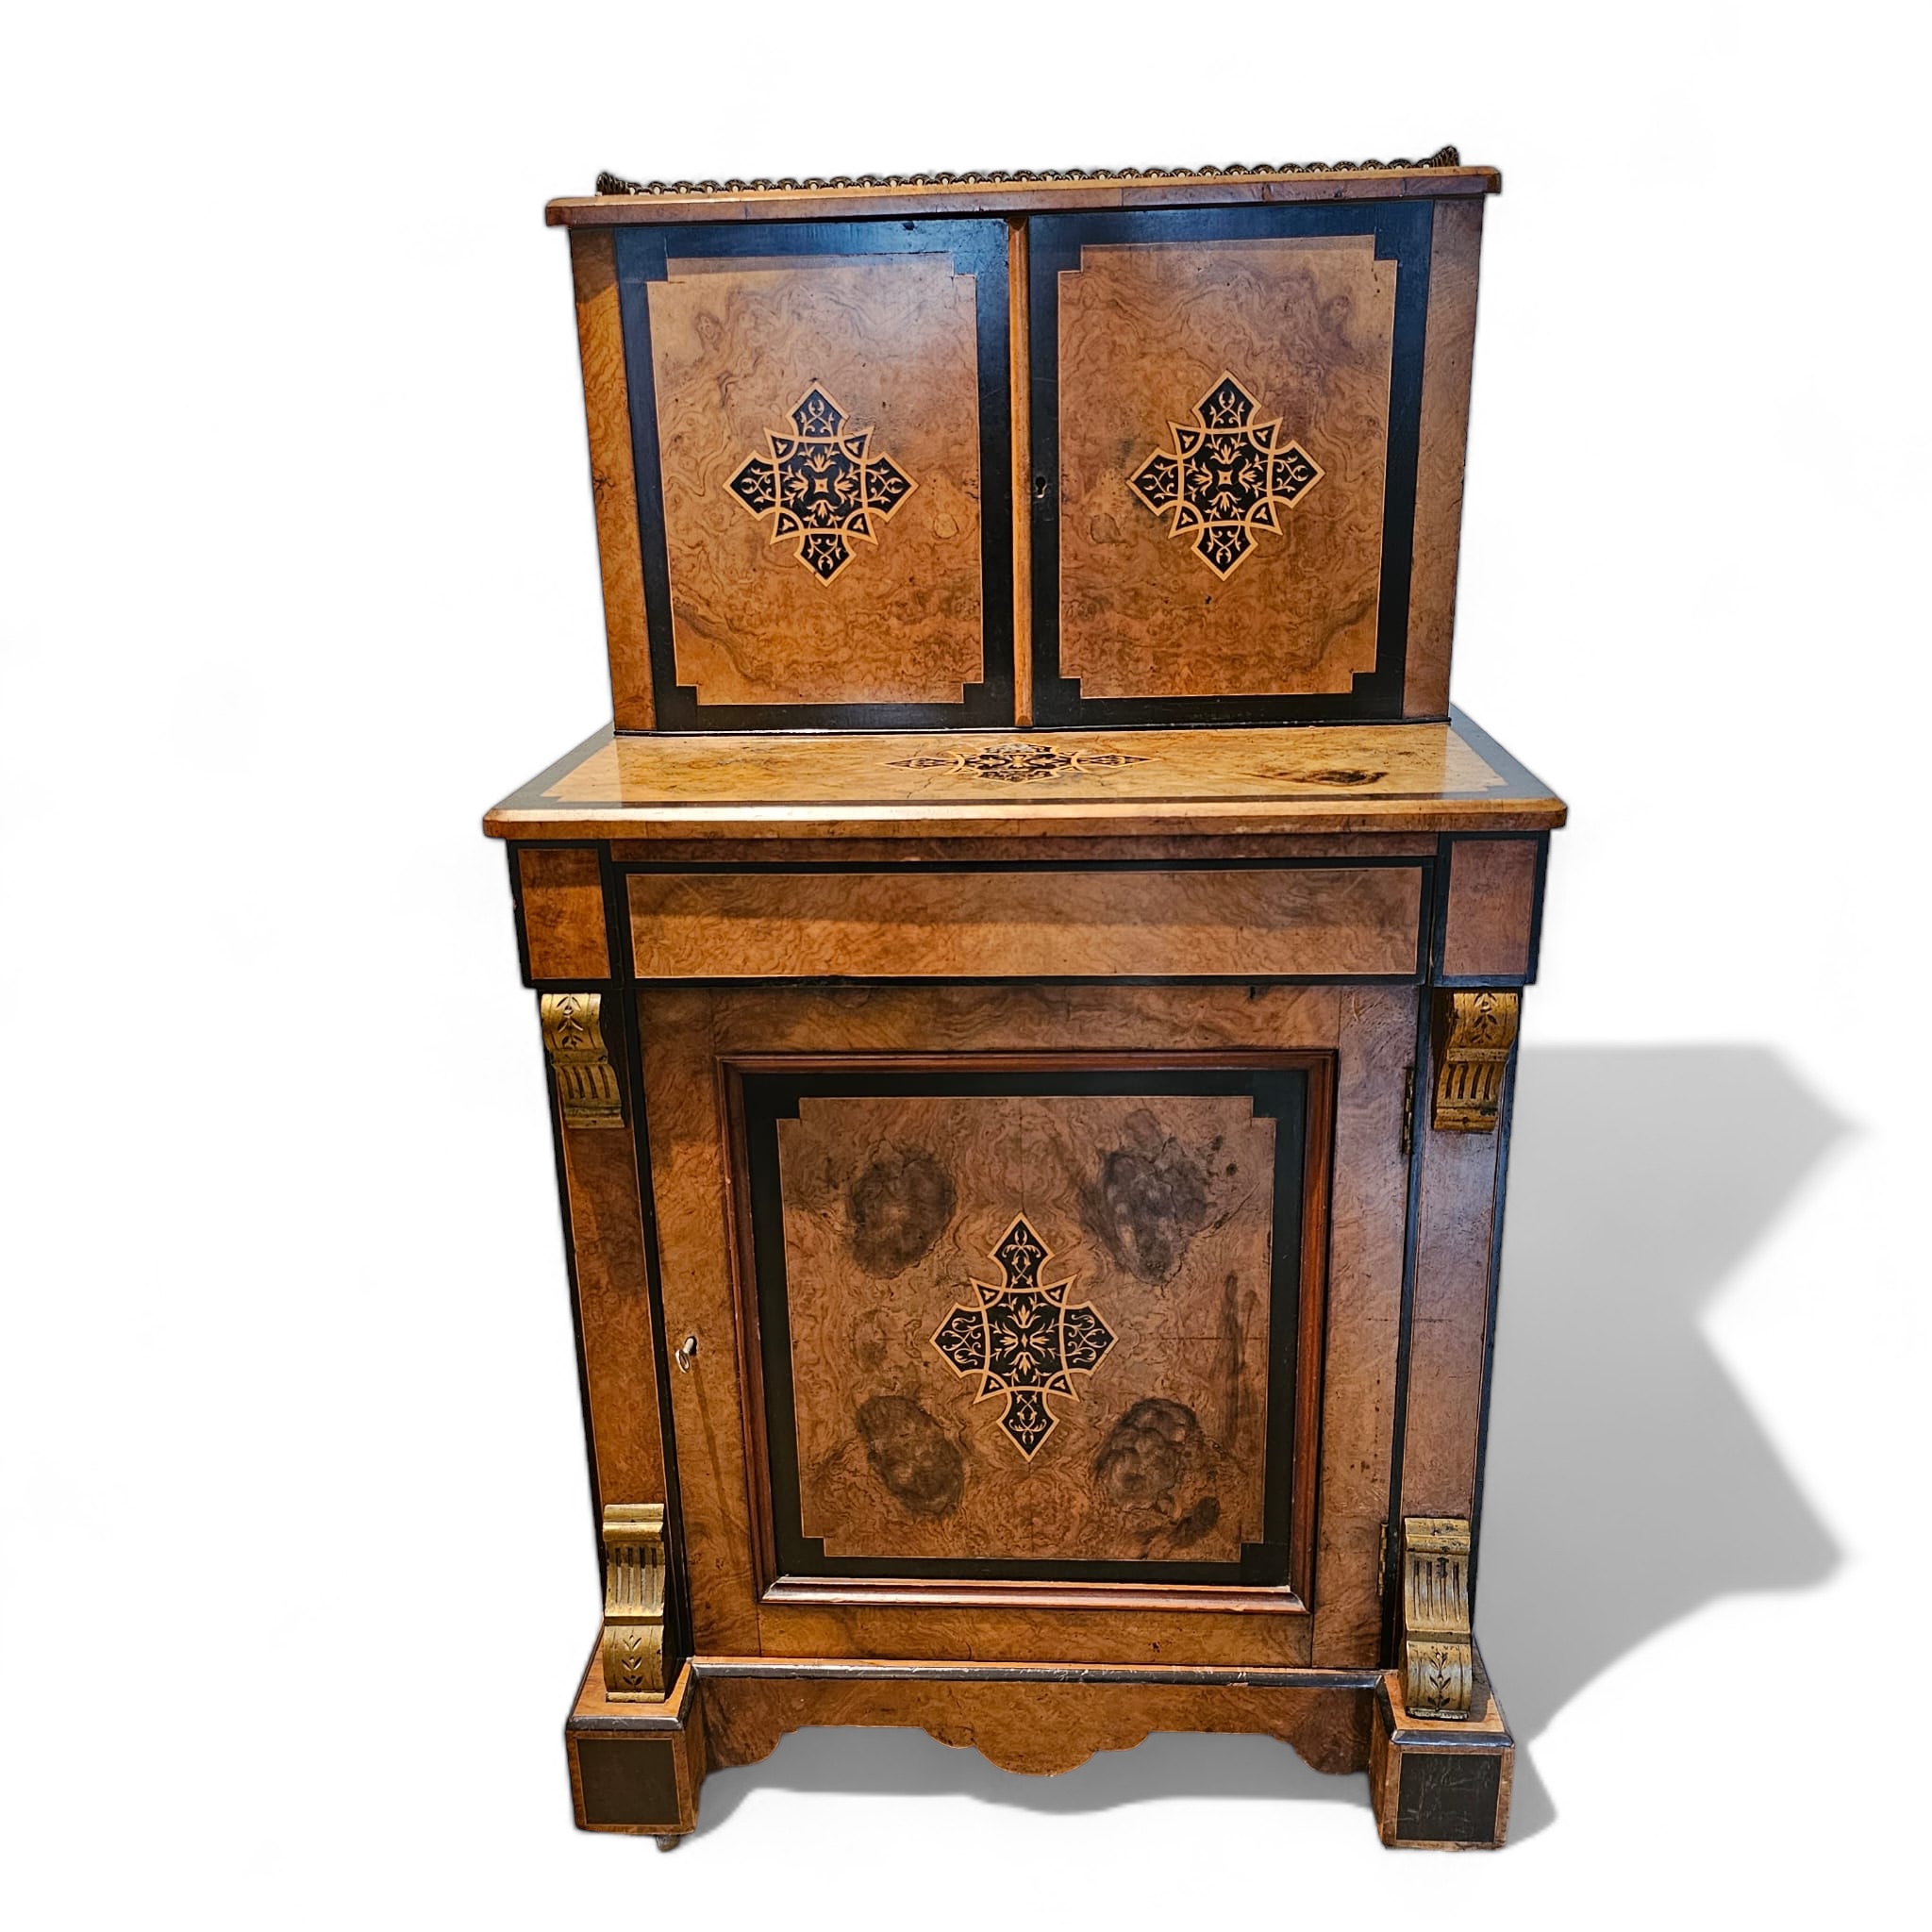 A Victorian Burr Walnut Ebonised Davenport with a fitted Upstand above a writing drawer and cupboard - Image 2 of 4